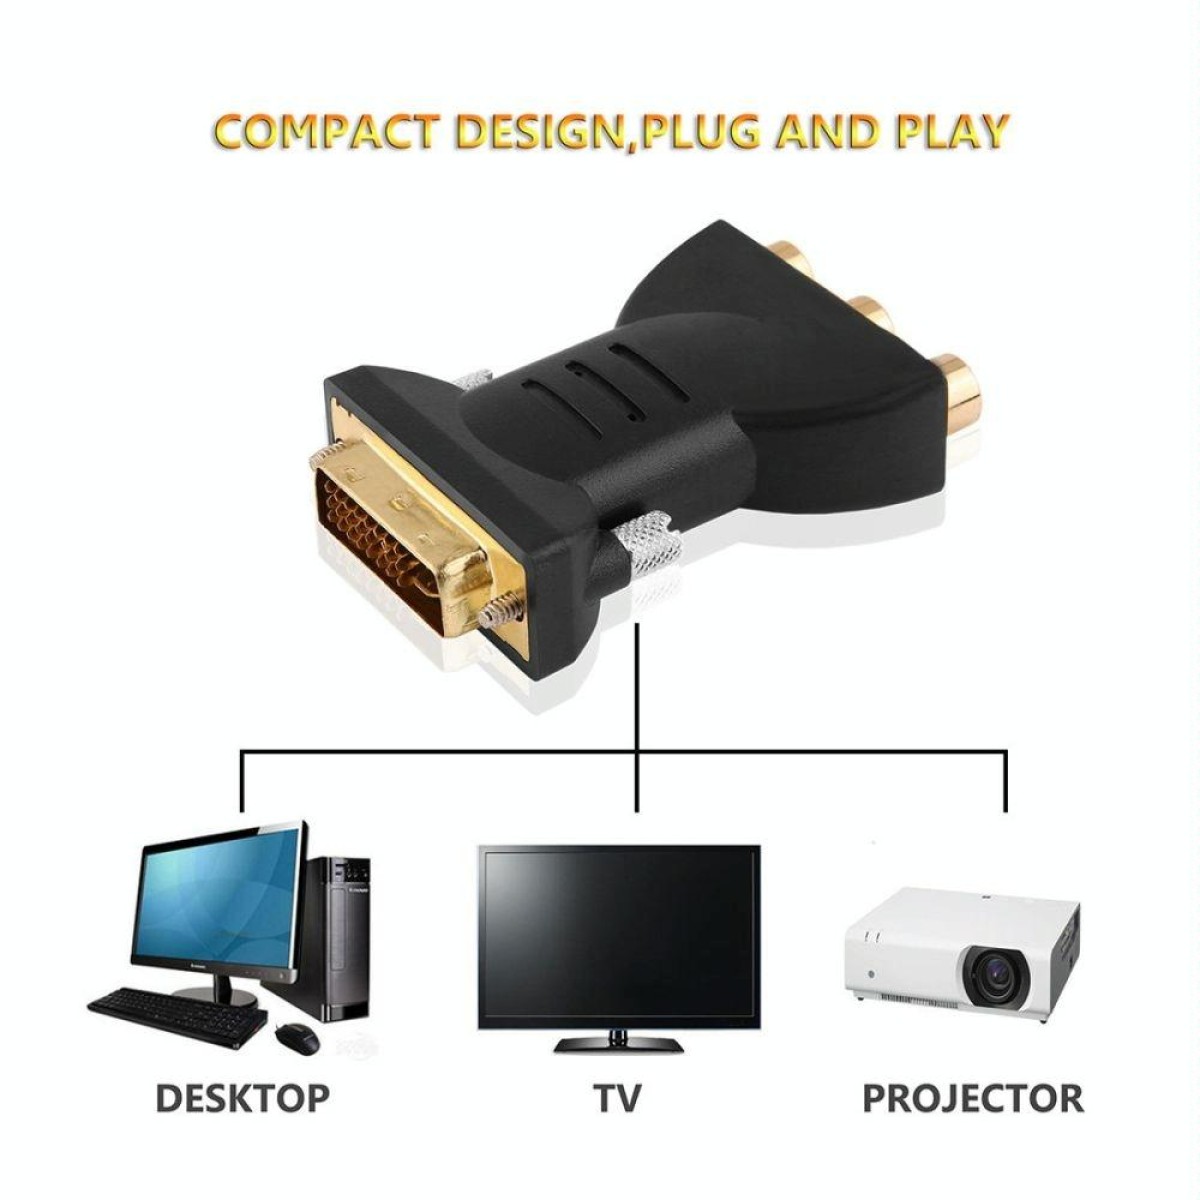 Gold Plated  DVI-I 24+5 Male to 3 RCA Gold-plated Video Audio AV Component Converter